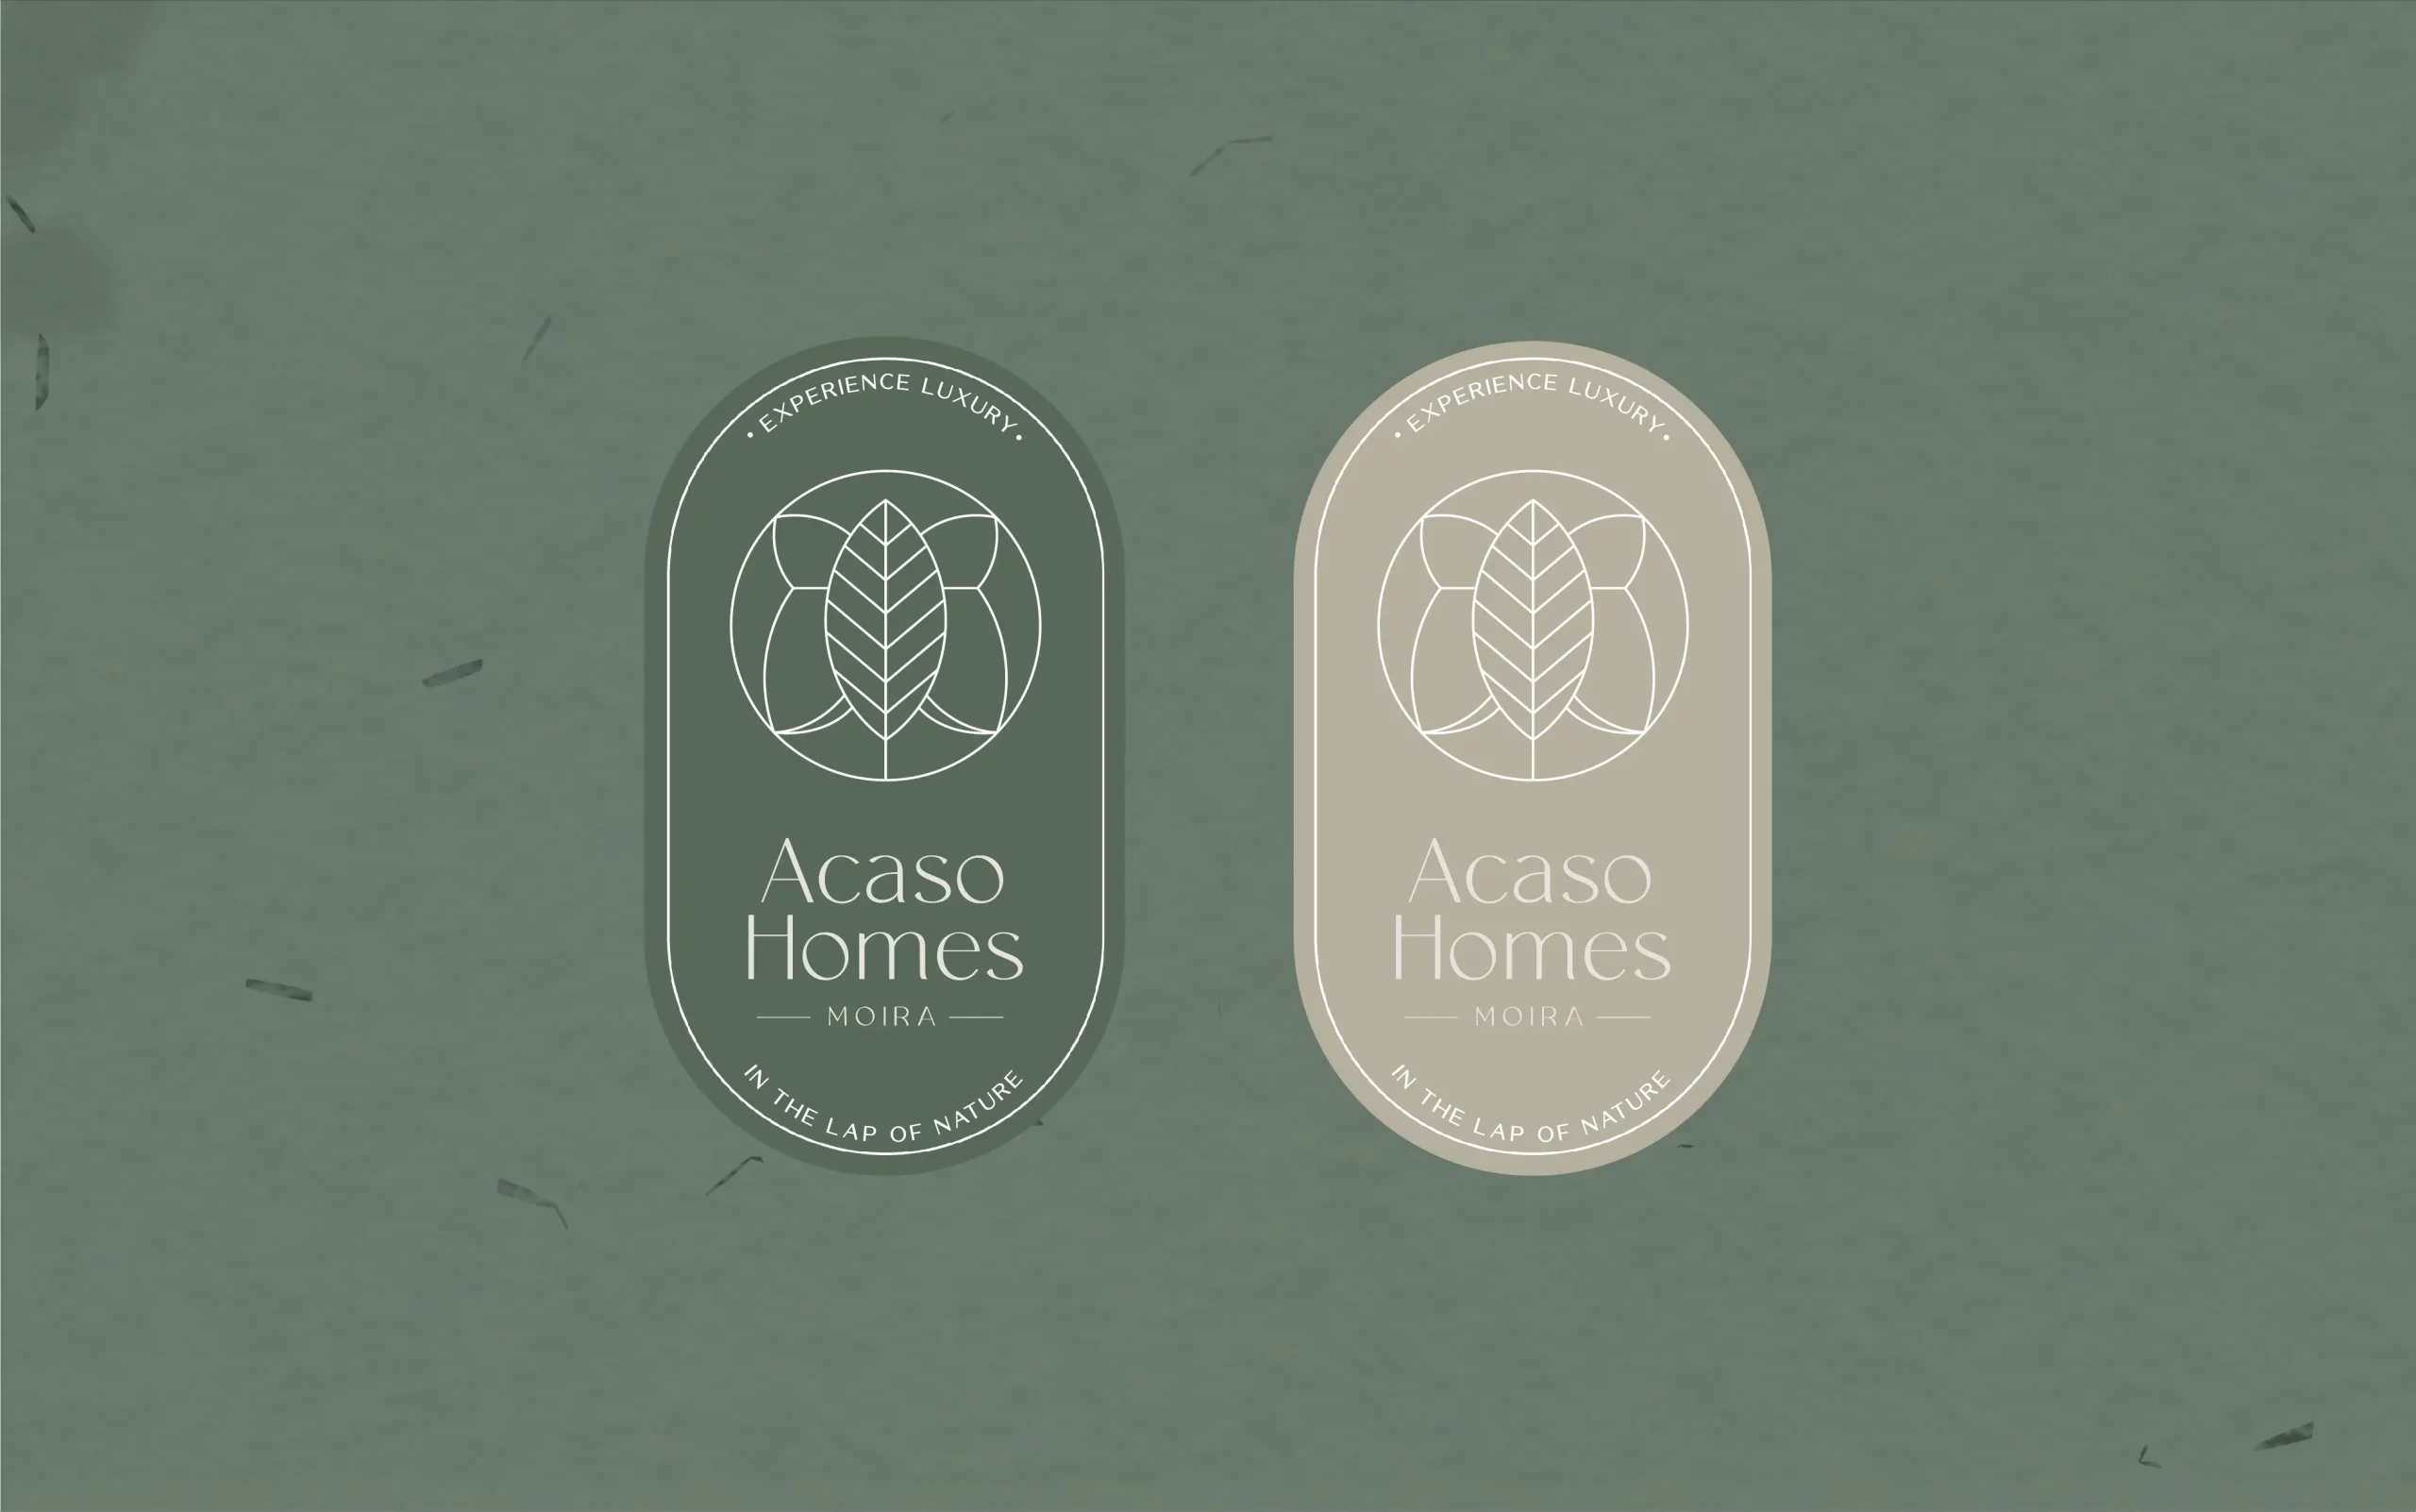 A logo for agro humes.